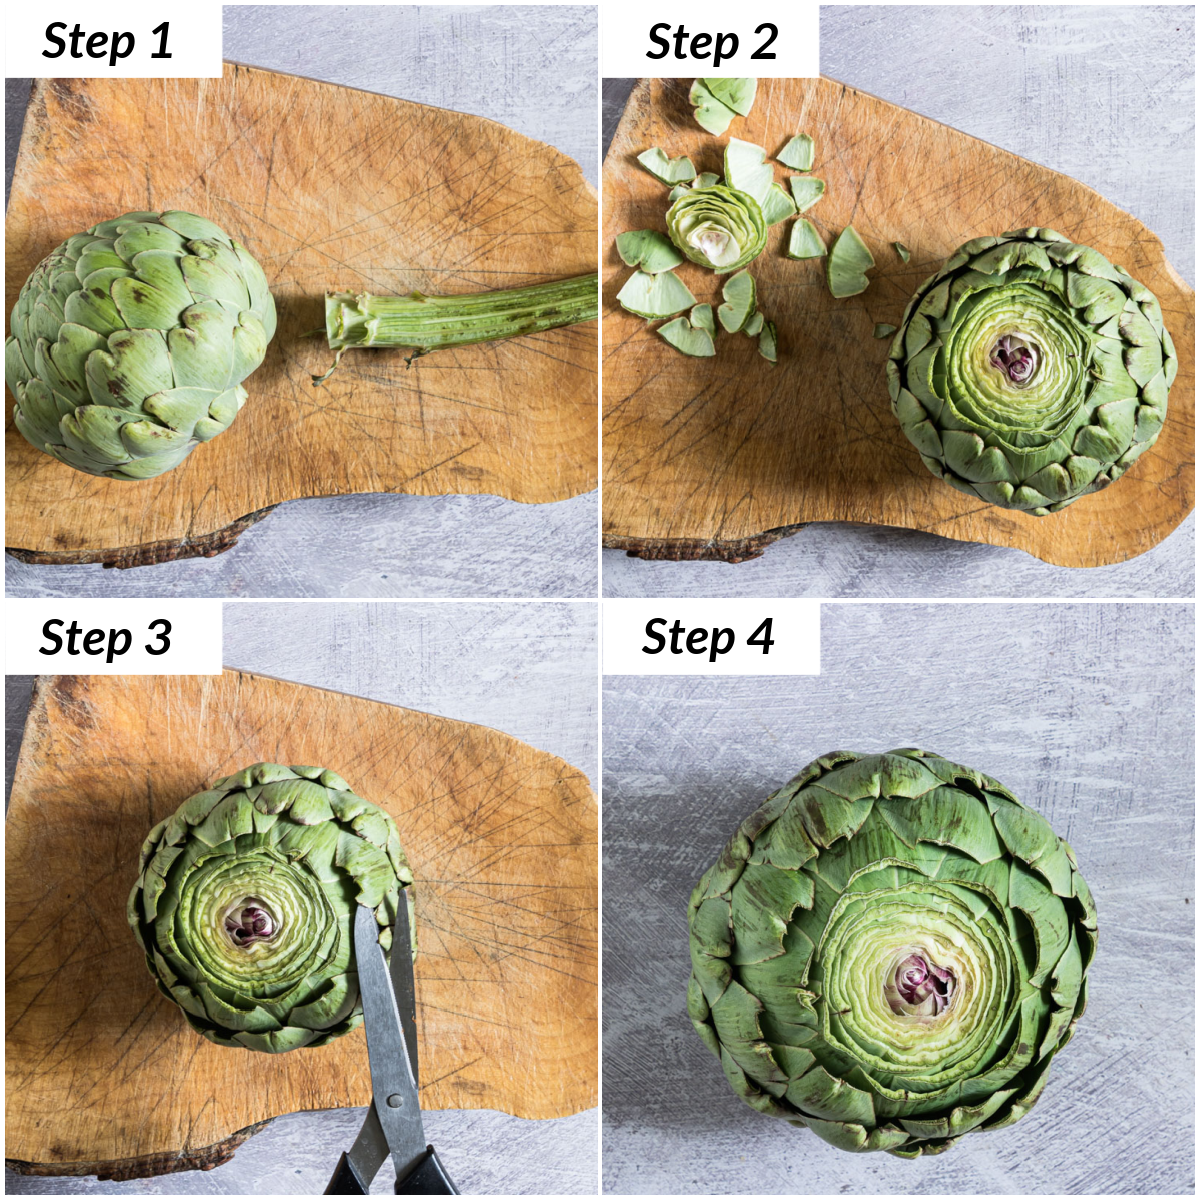 image collage showing the steps for trimming and preparing artichokes